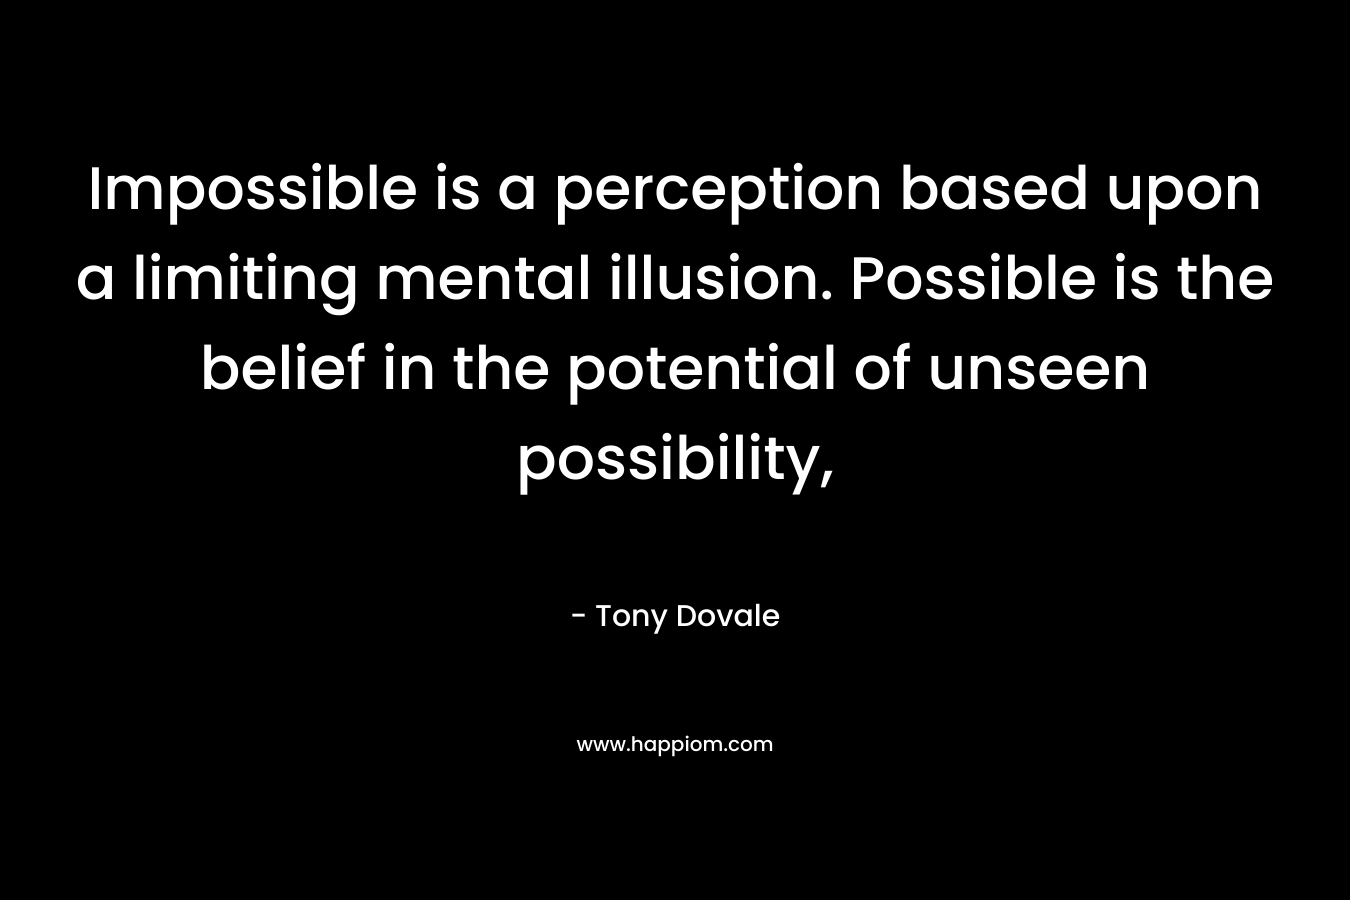 Impossible is a perception based upon a limiting mental illusion. Possible is the belief in the potential of unseen possibility,